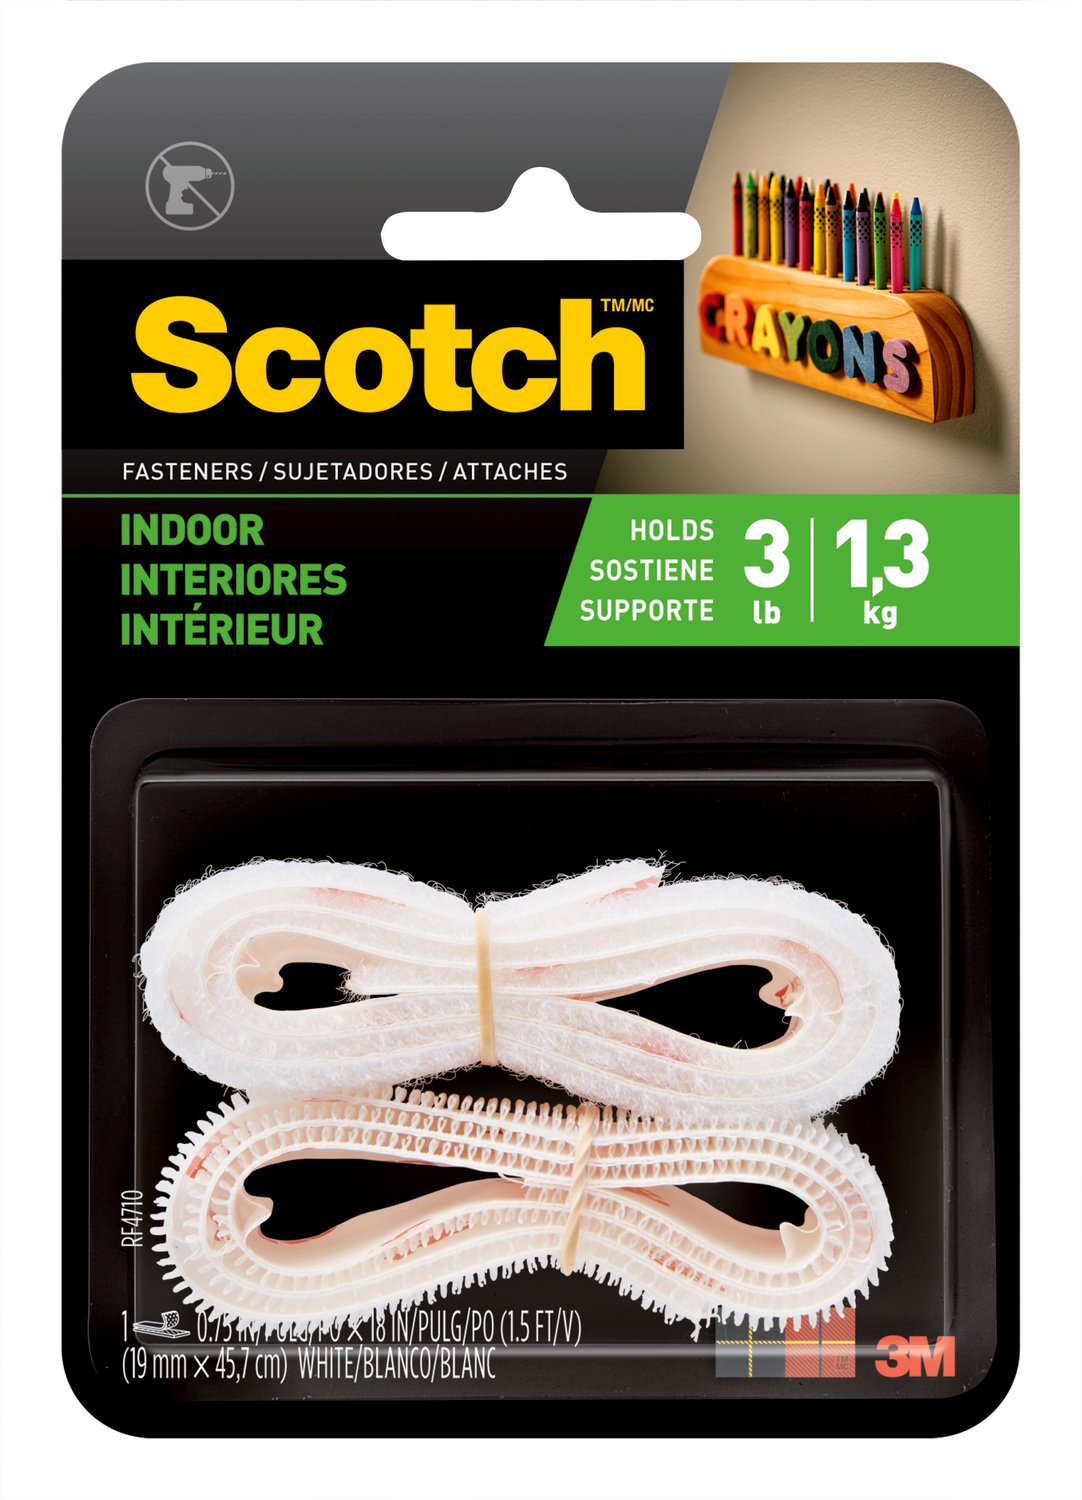 7100093873 - Scotch Indoor Fasteners RF4710, 3/4 in x 1.5ft (19,0 mm x 45,7 cm)
White 1 Set of Strips